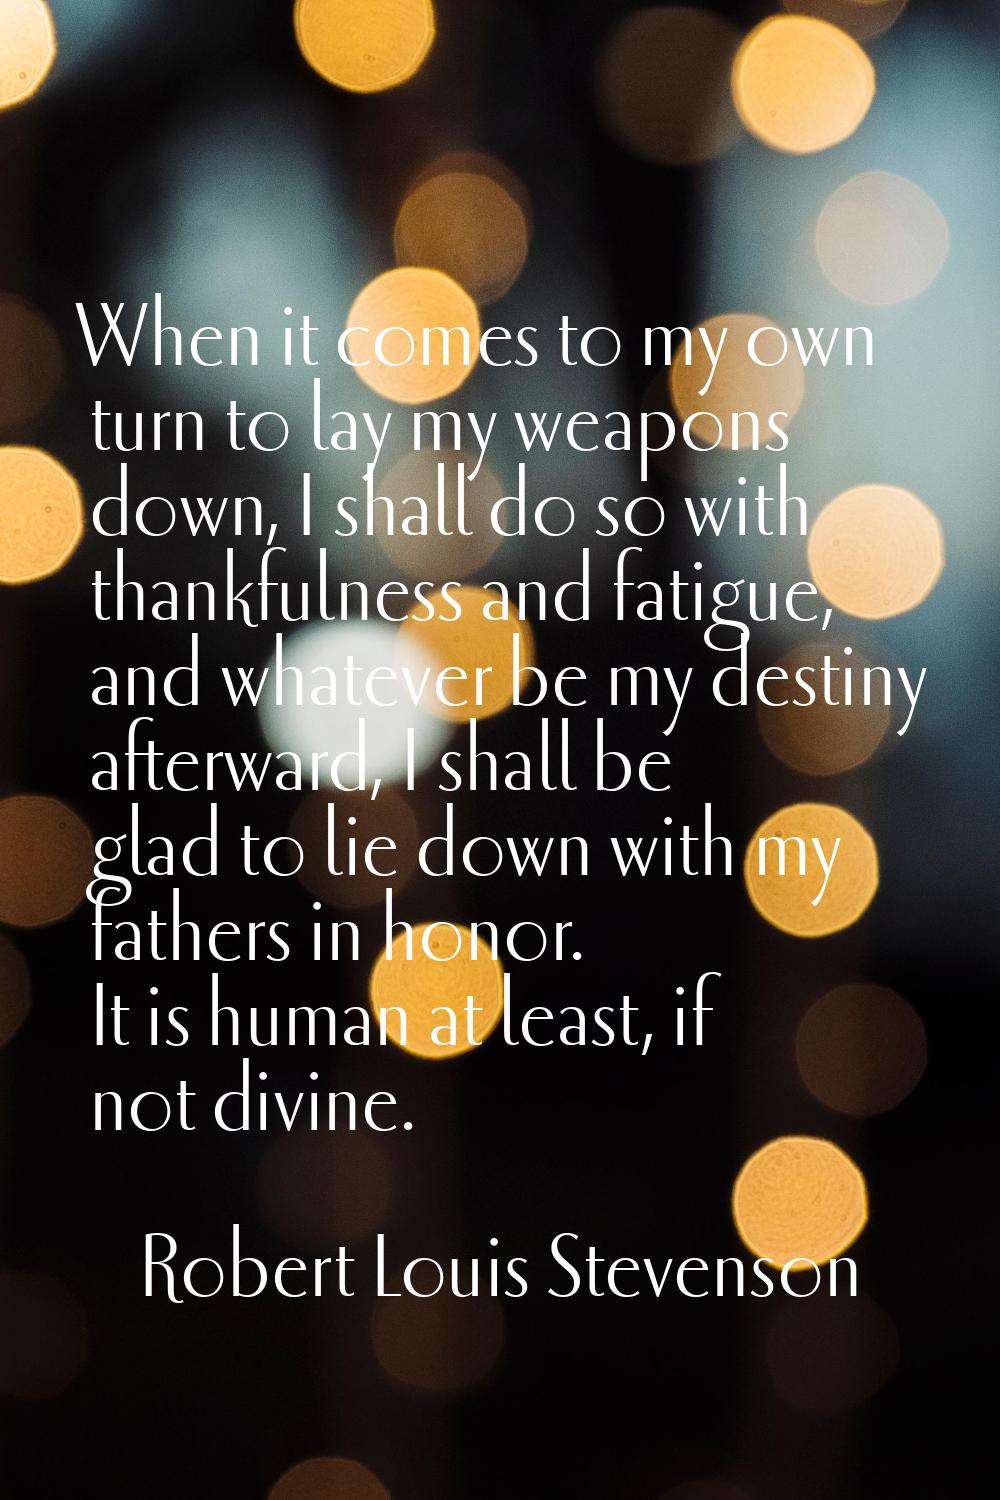 When it comes to my own turn to lay my weapons down, I shall do so with thankfulness and fatigue, a